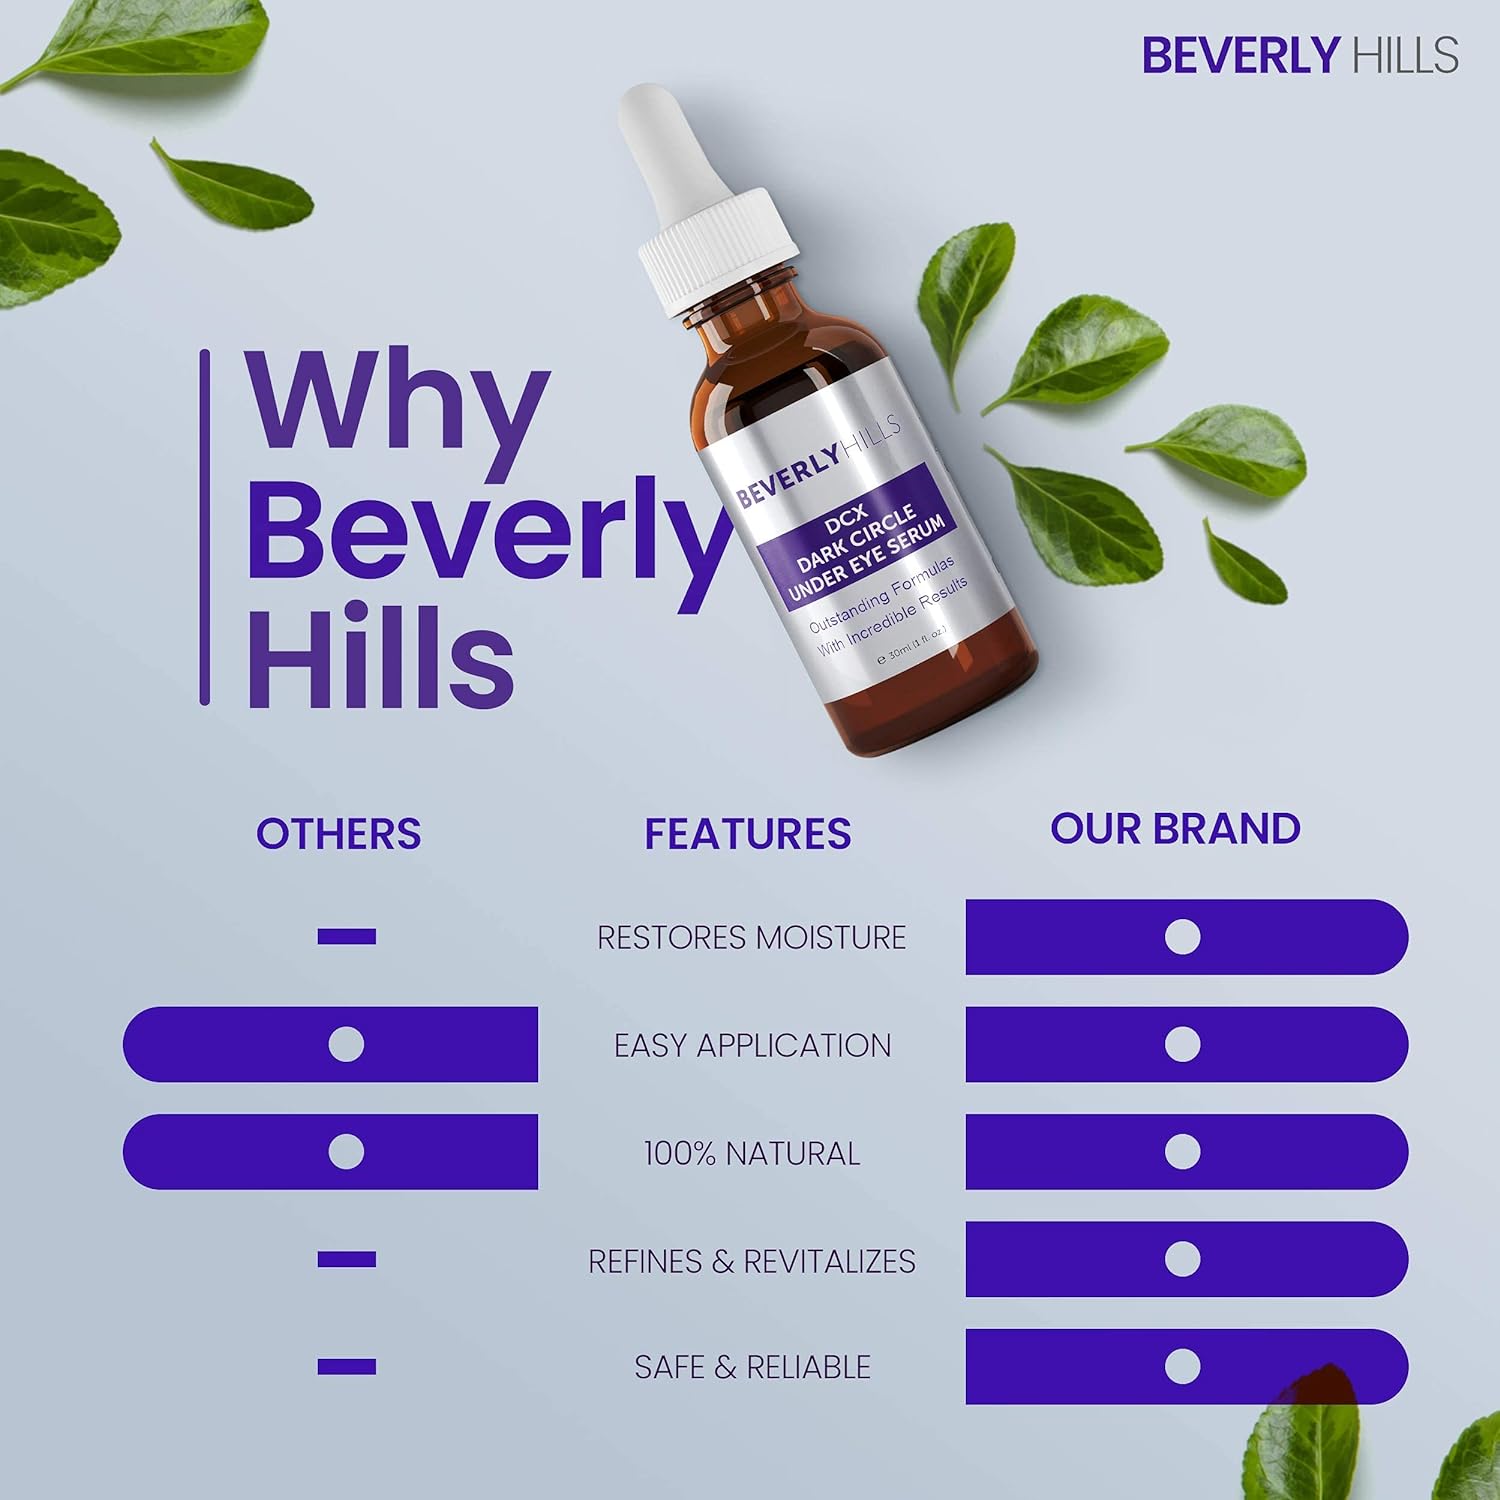 Beverly Hills DCX Under Eye Serum for Wrinkles, Puffy Eyes and Dark Circles Treatment for All Skin Types | Anti Wrinkle Serum with Seaweed, Hyaluronic Acids & Peptides for Hydrated & Soft Skin, 30 mL : Beauty & Personal Care